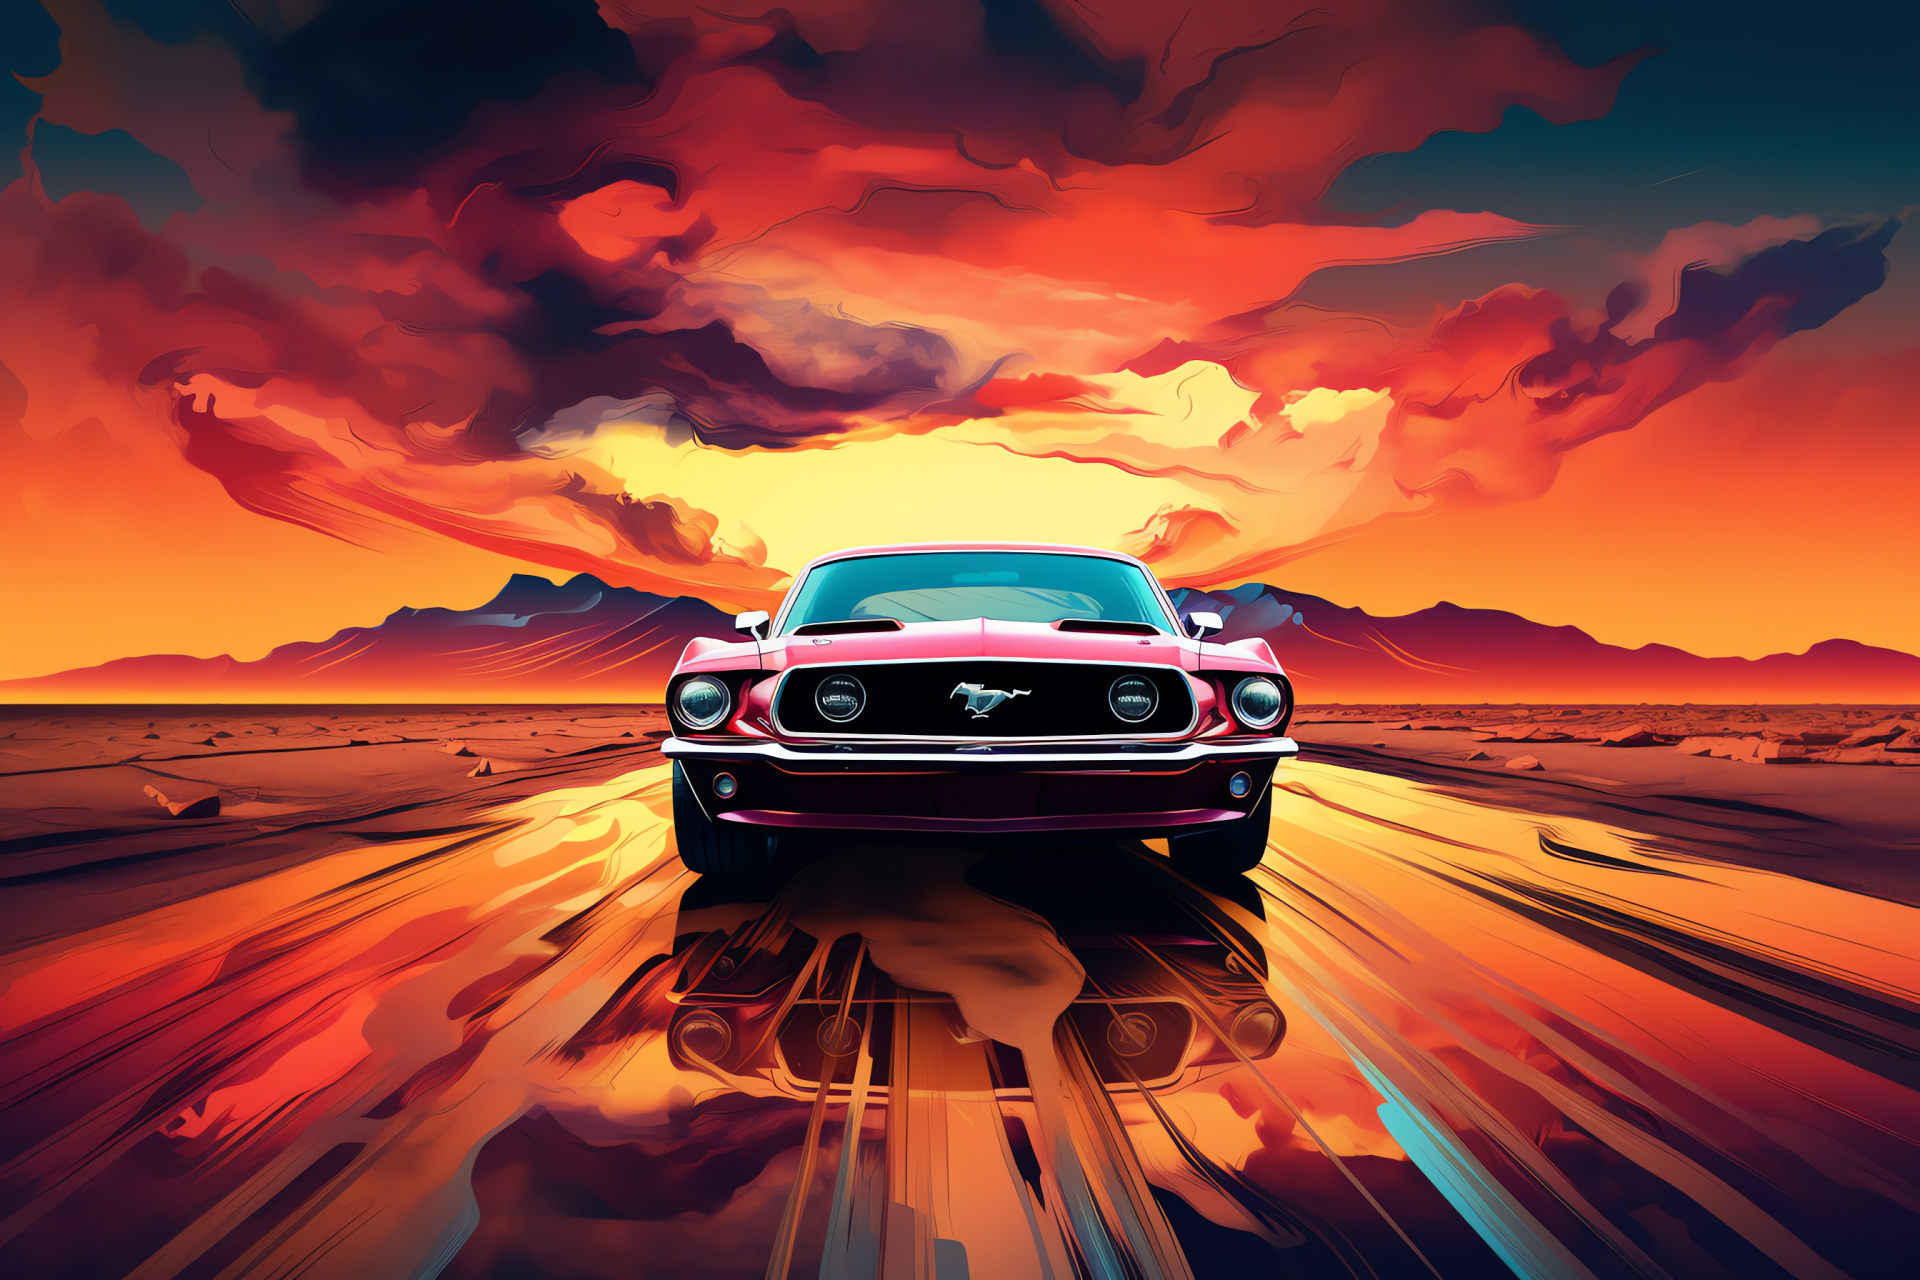 Ford Mustang, Full-length automobile angle, Surrealistic terrain depiction, Geometric landscape patterns, Modern vehicle aesthetic, HD Desktop Image